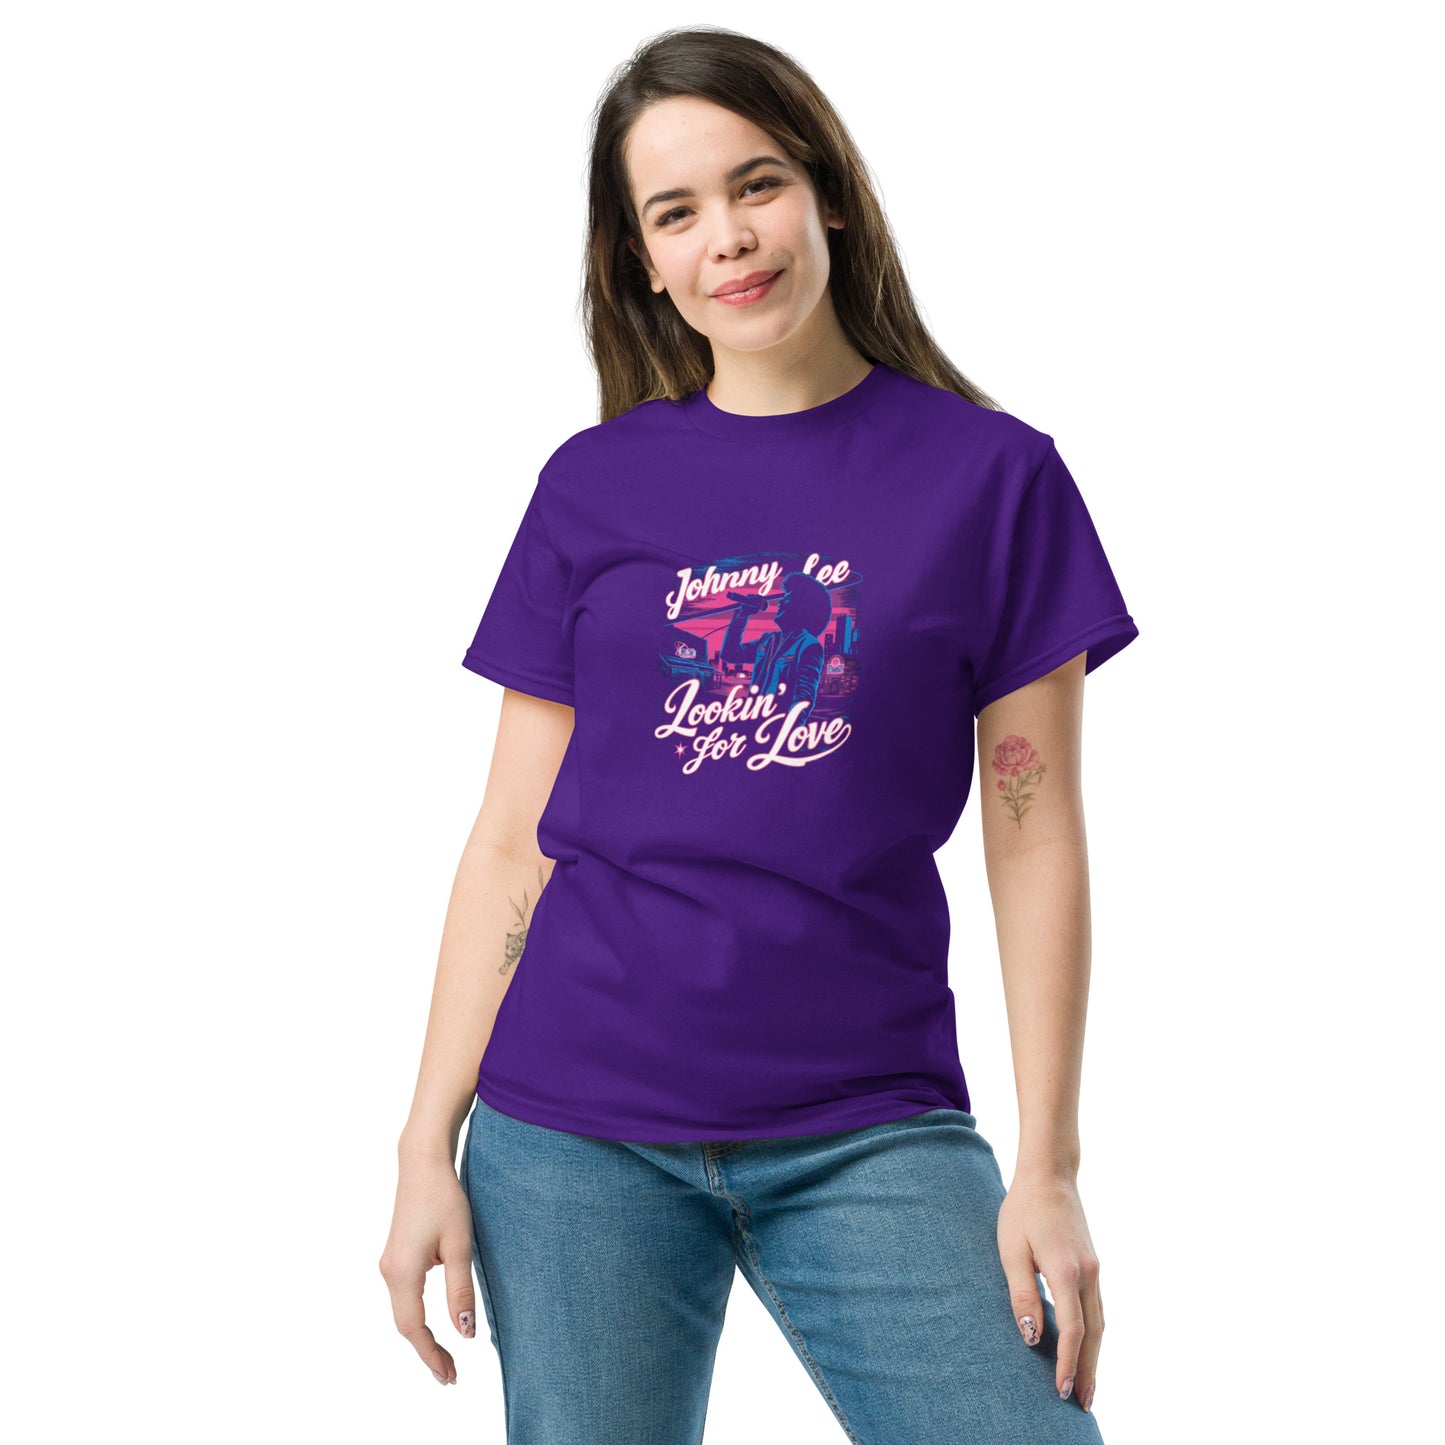 Lookin' For Love - Inspired by Johnny Lee | Classic Country Tees